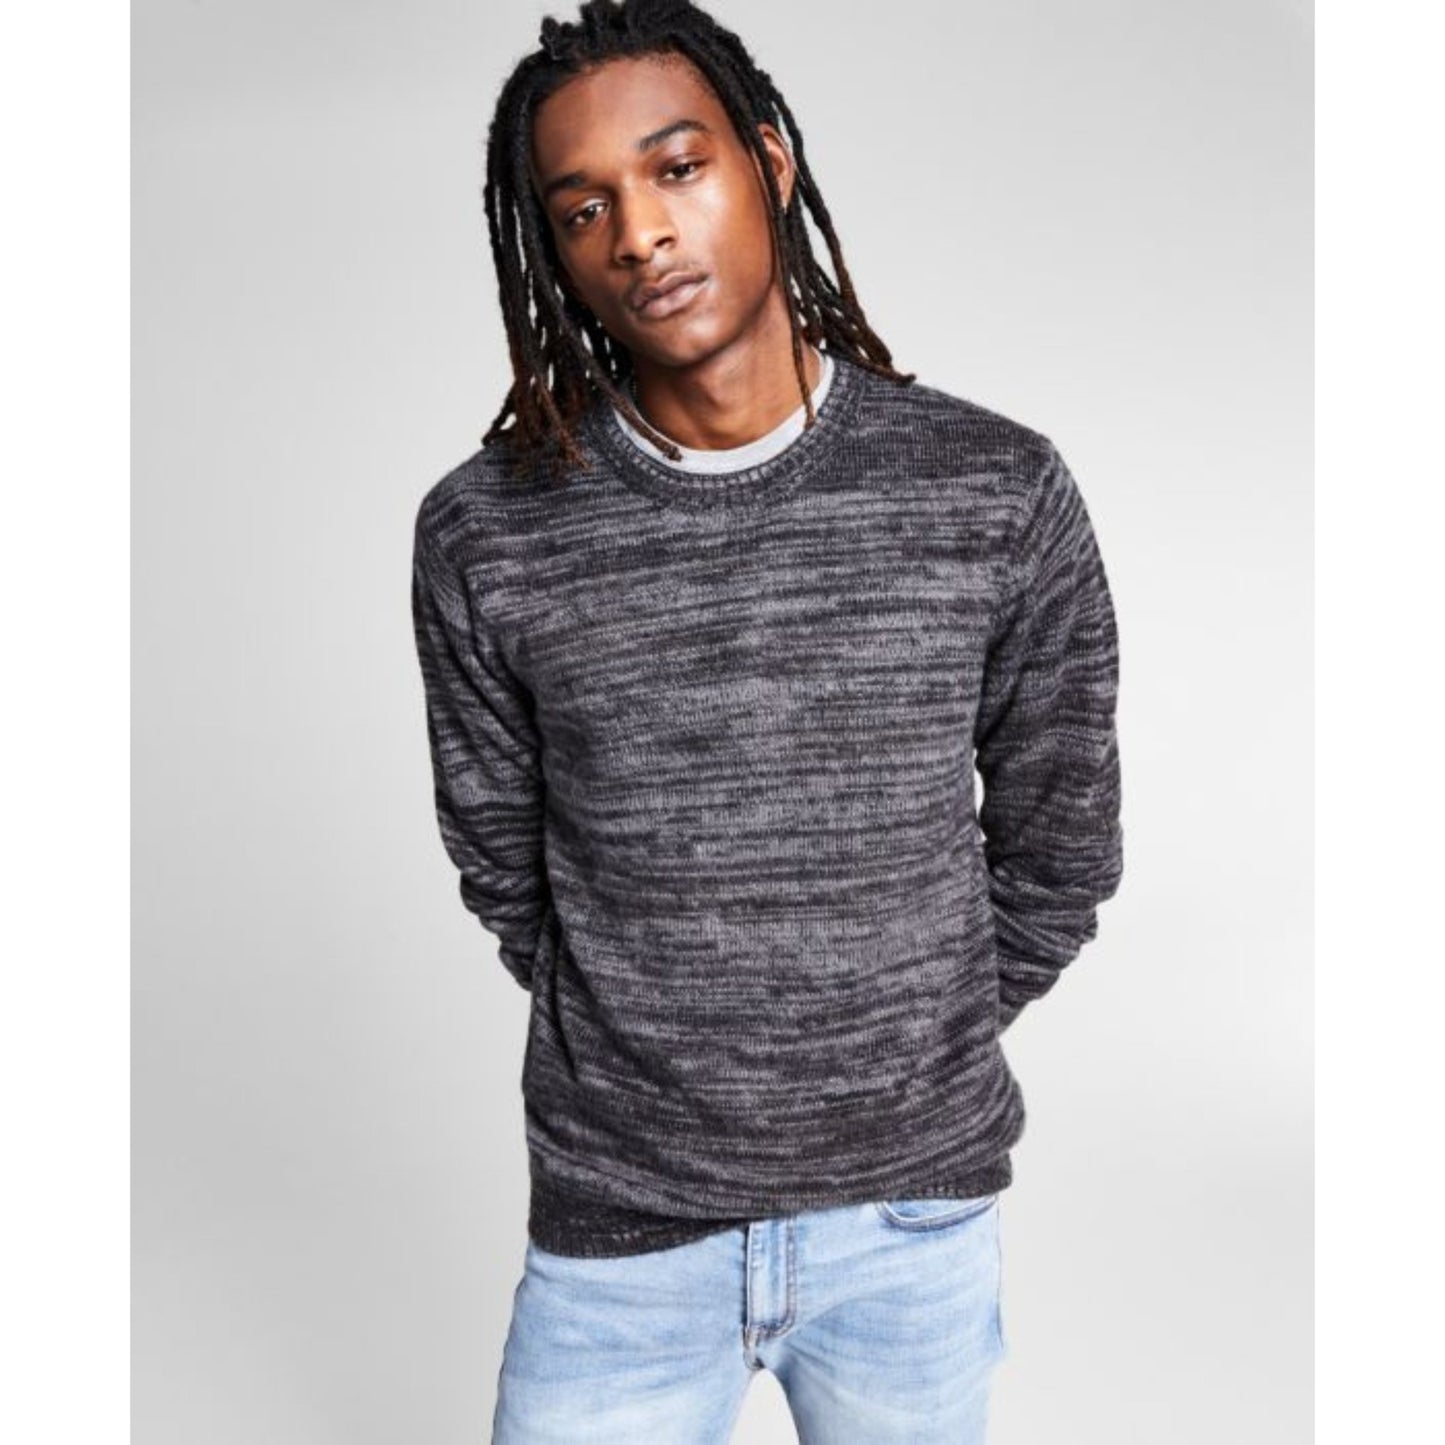 And Now This-And Now This Mens Regular-Fit Marled Brushed Sweater, Black - Brandat Outlet